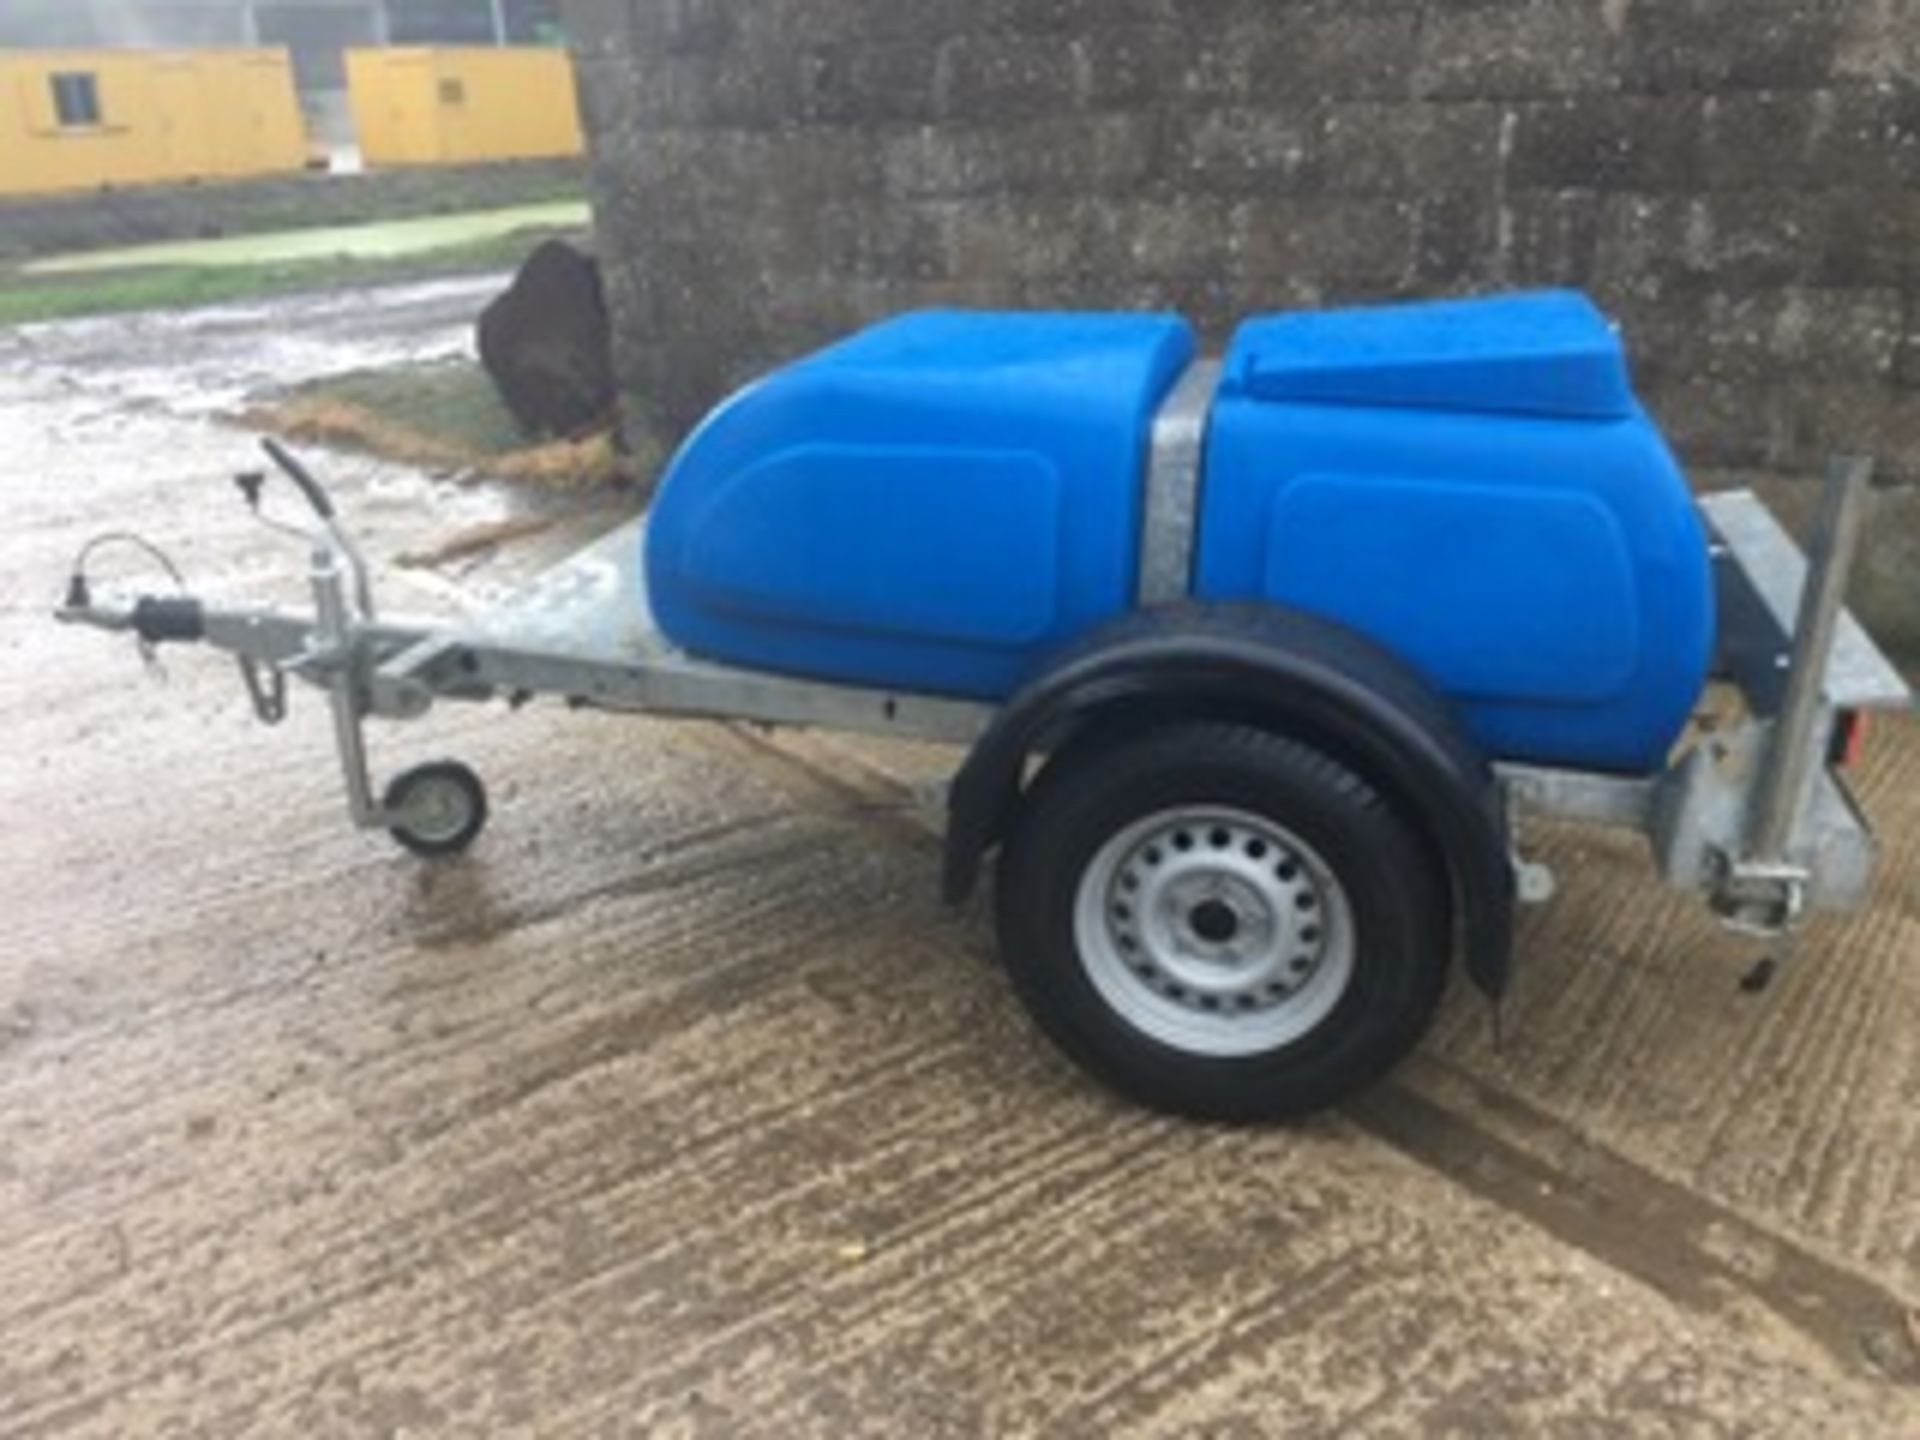 500 litre Water Bowser